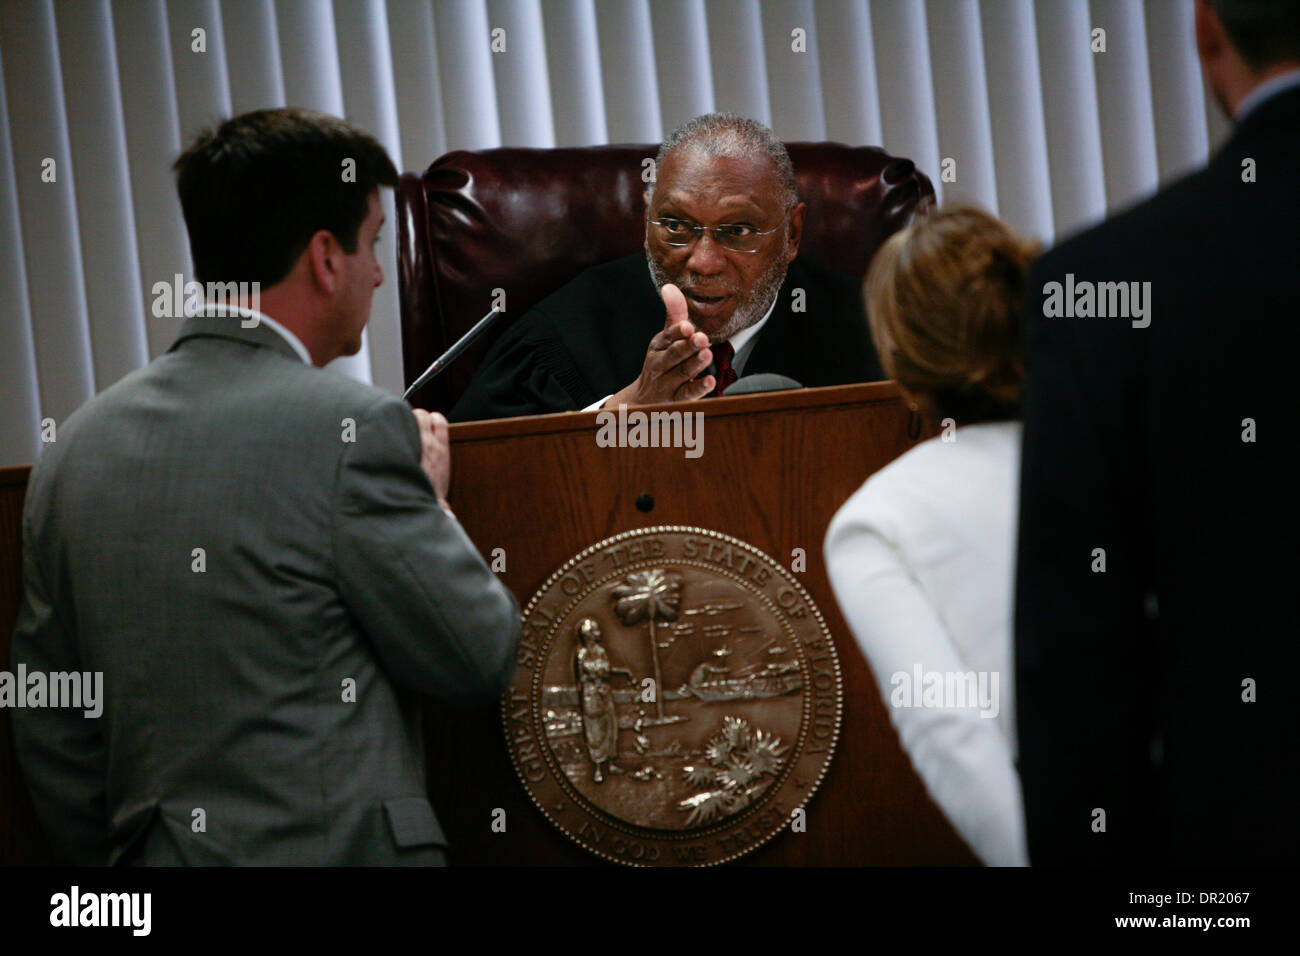 TP 301878 AMAR judgeperry 5 of 5 (02/19/2009 Sanford) Seminole County Circuit Judge James Perry addressed prosecuting attorney William E. Sublette, far left, at the bench during an accident trail, while court reporter Dawn Roscher-Herron listens in. Judge Perry, of the 18th Judicial Circuit, is one of four nominated to the Florida Supreme Court by Governor Charlie Crist. (Credit Im Stock Photo